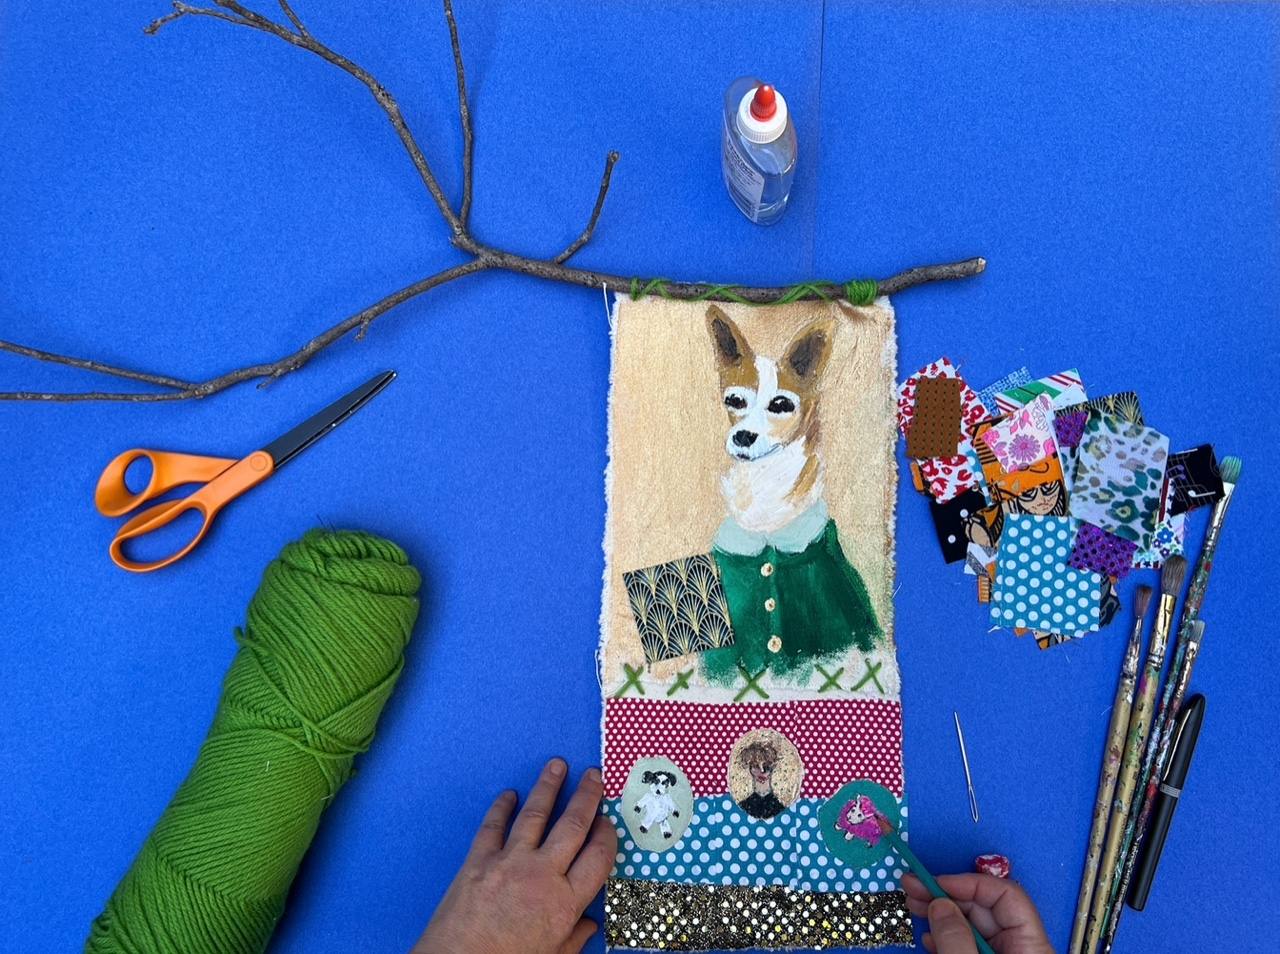 Image of hands creating a portrait of a dog using fabrics, thread, and paint.